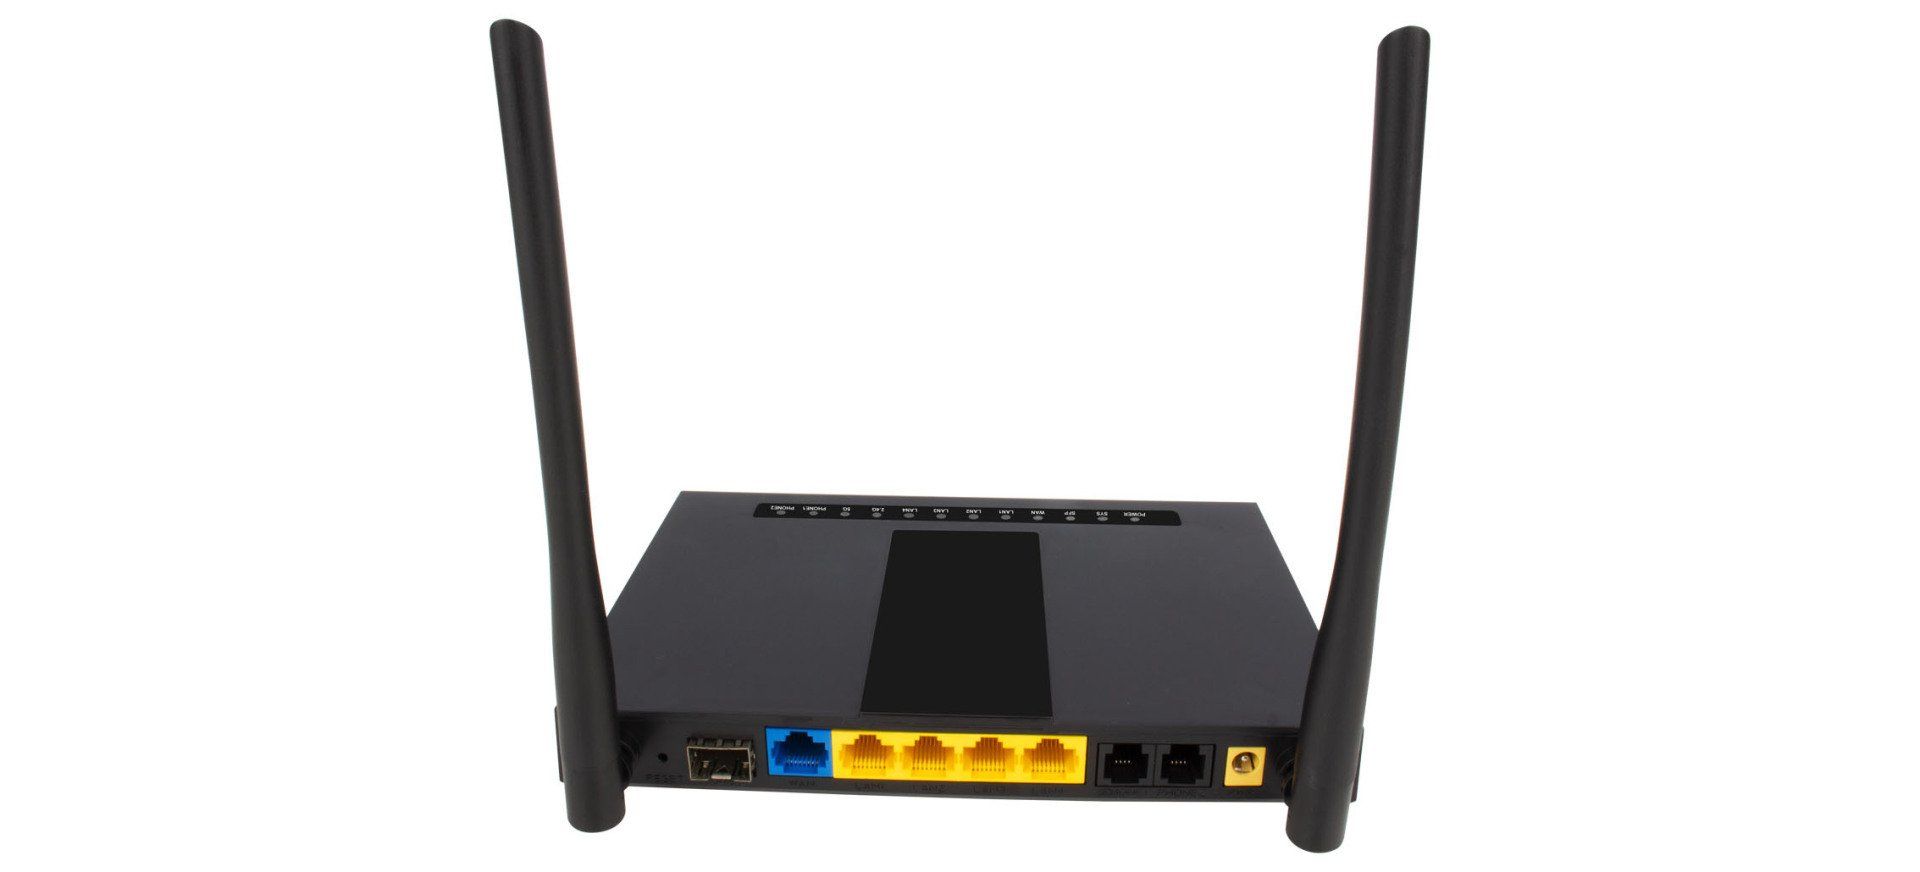 AC1100MSF Wireless AC VoIP Router with SFP Fiber Port